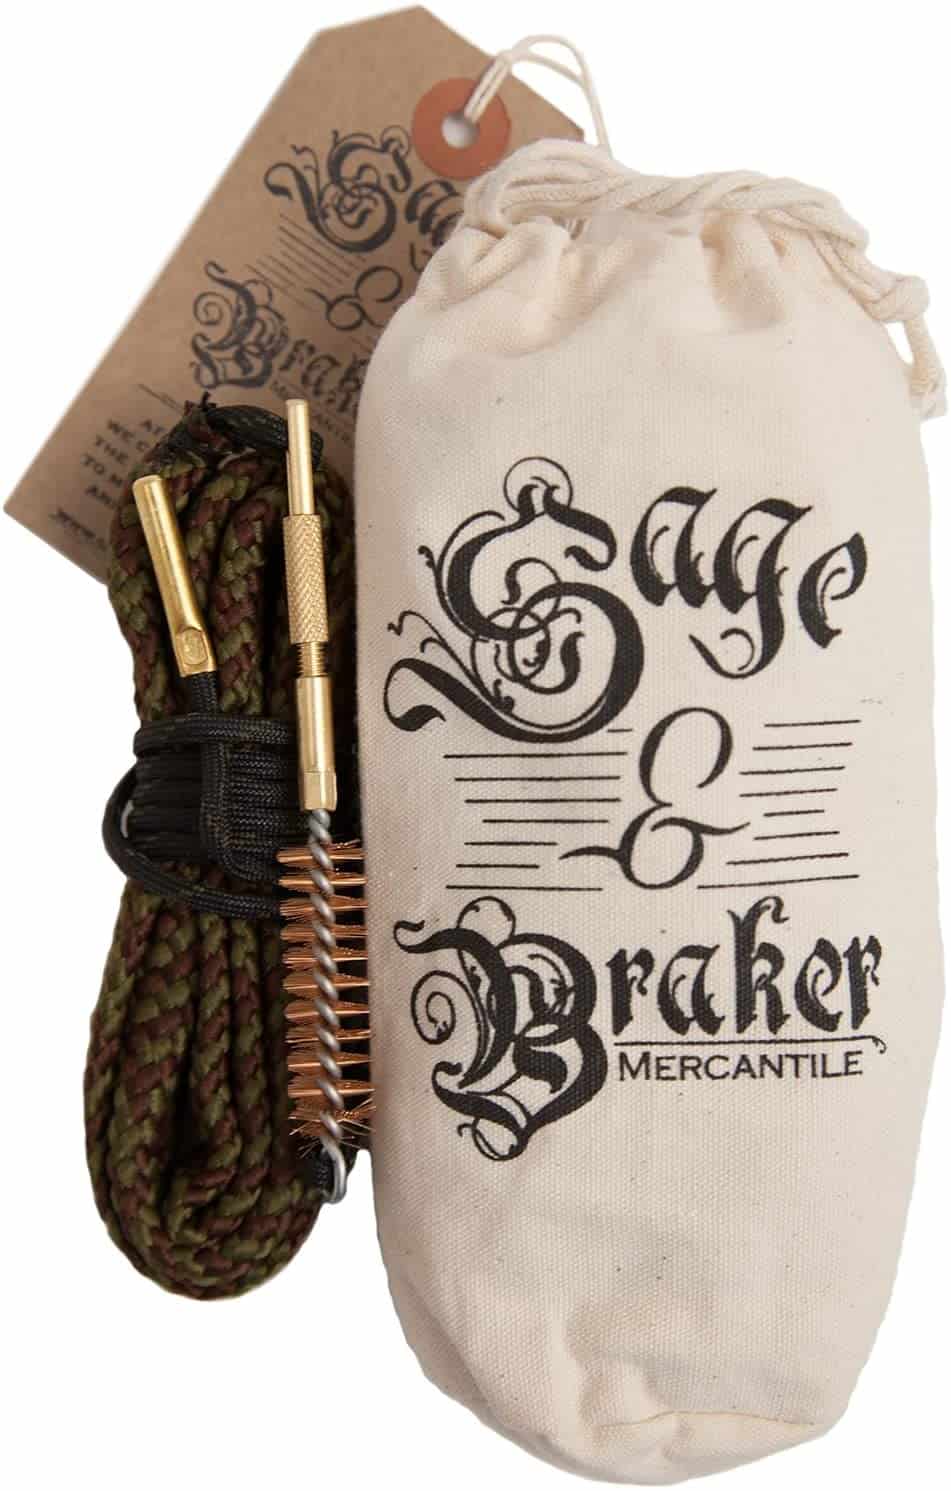 Gun Cleaning Kits by Sage & Braker. Detachable Bronze Brush Makes for The Fastest, cleanest and Easiest Way to Clean Your Shotgun and rifle's bore.